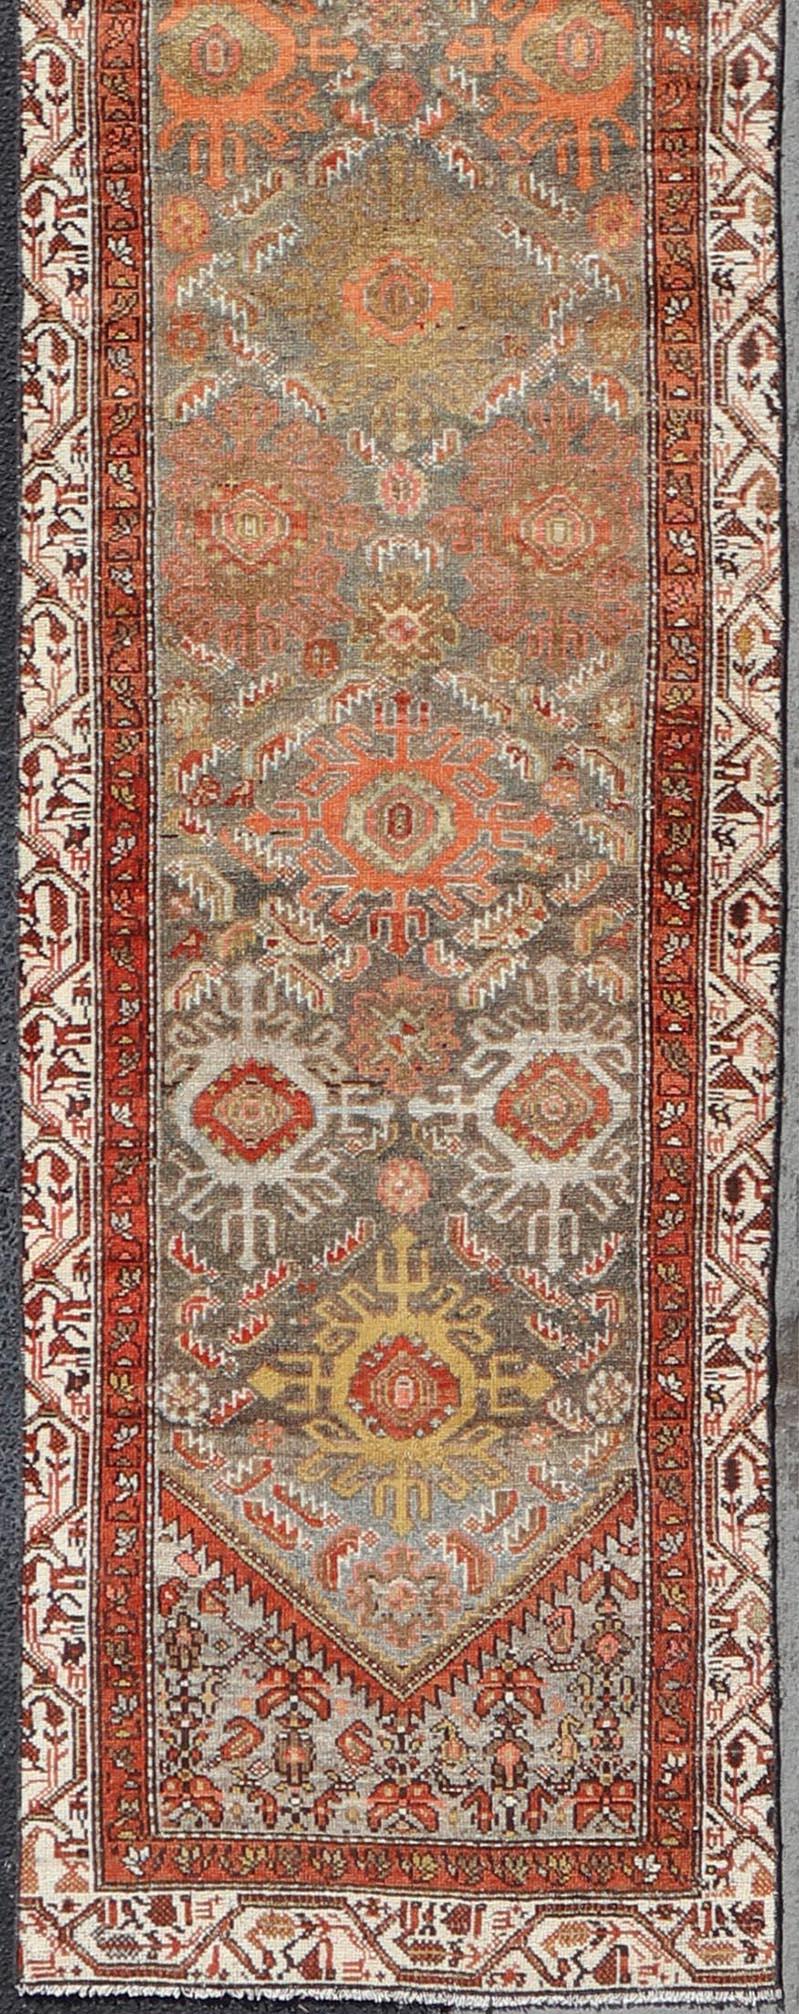 Measures: 2'6 x 16'3 

This runner features a beautiful desert palette of orange, rustic gold, taupe, cream, red, and camel, with a bright ivory border filled with nature motifs. The field holds incredible tribal-like crests proudly displaying the